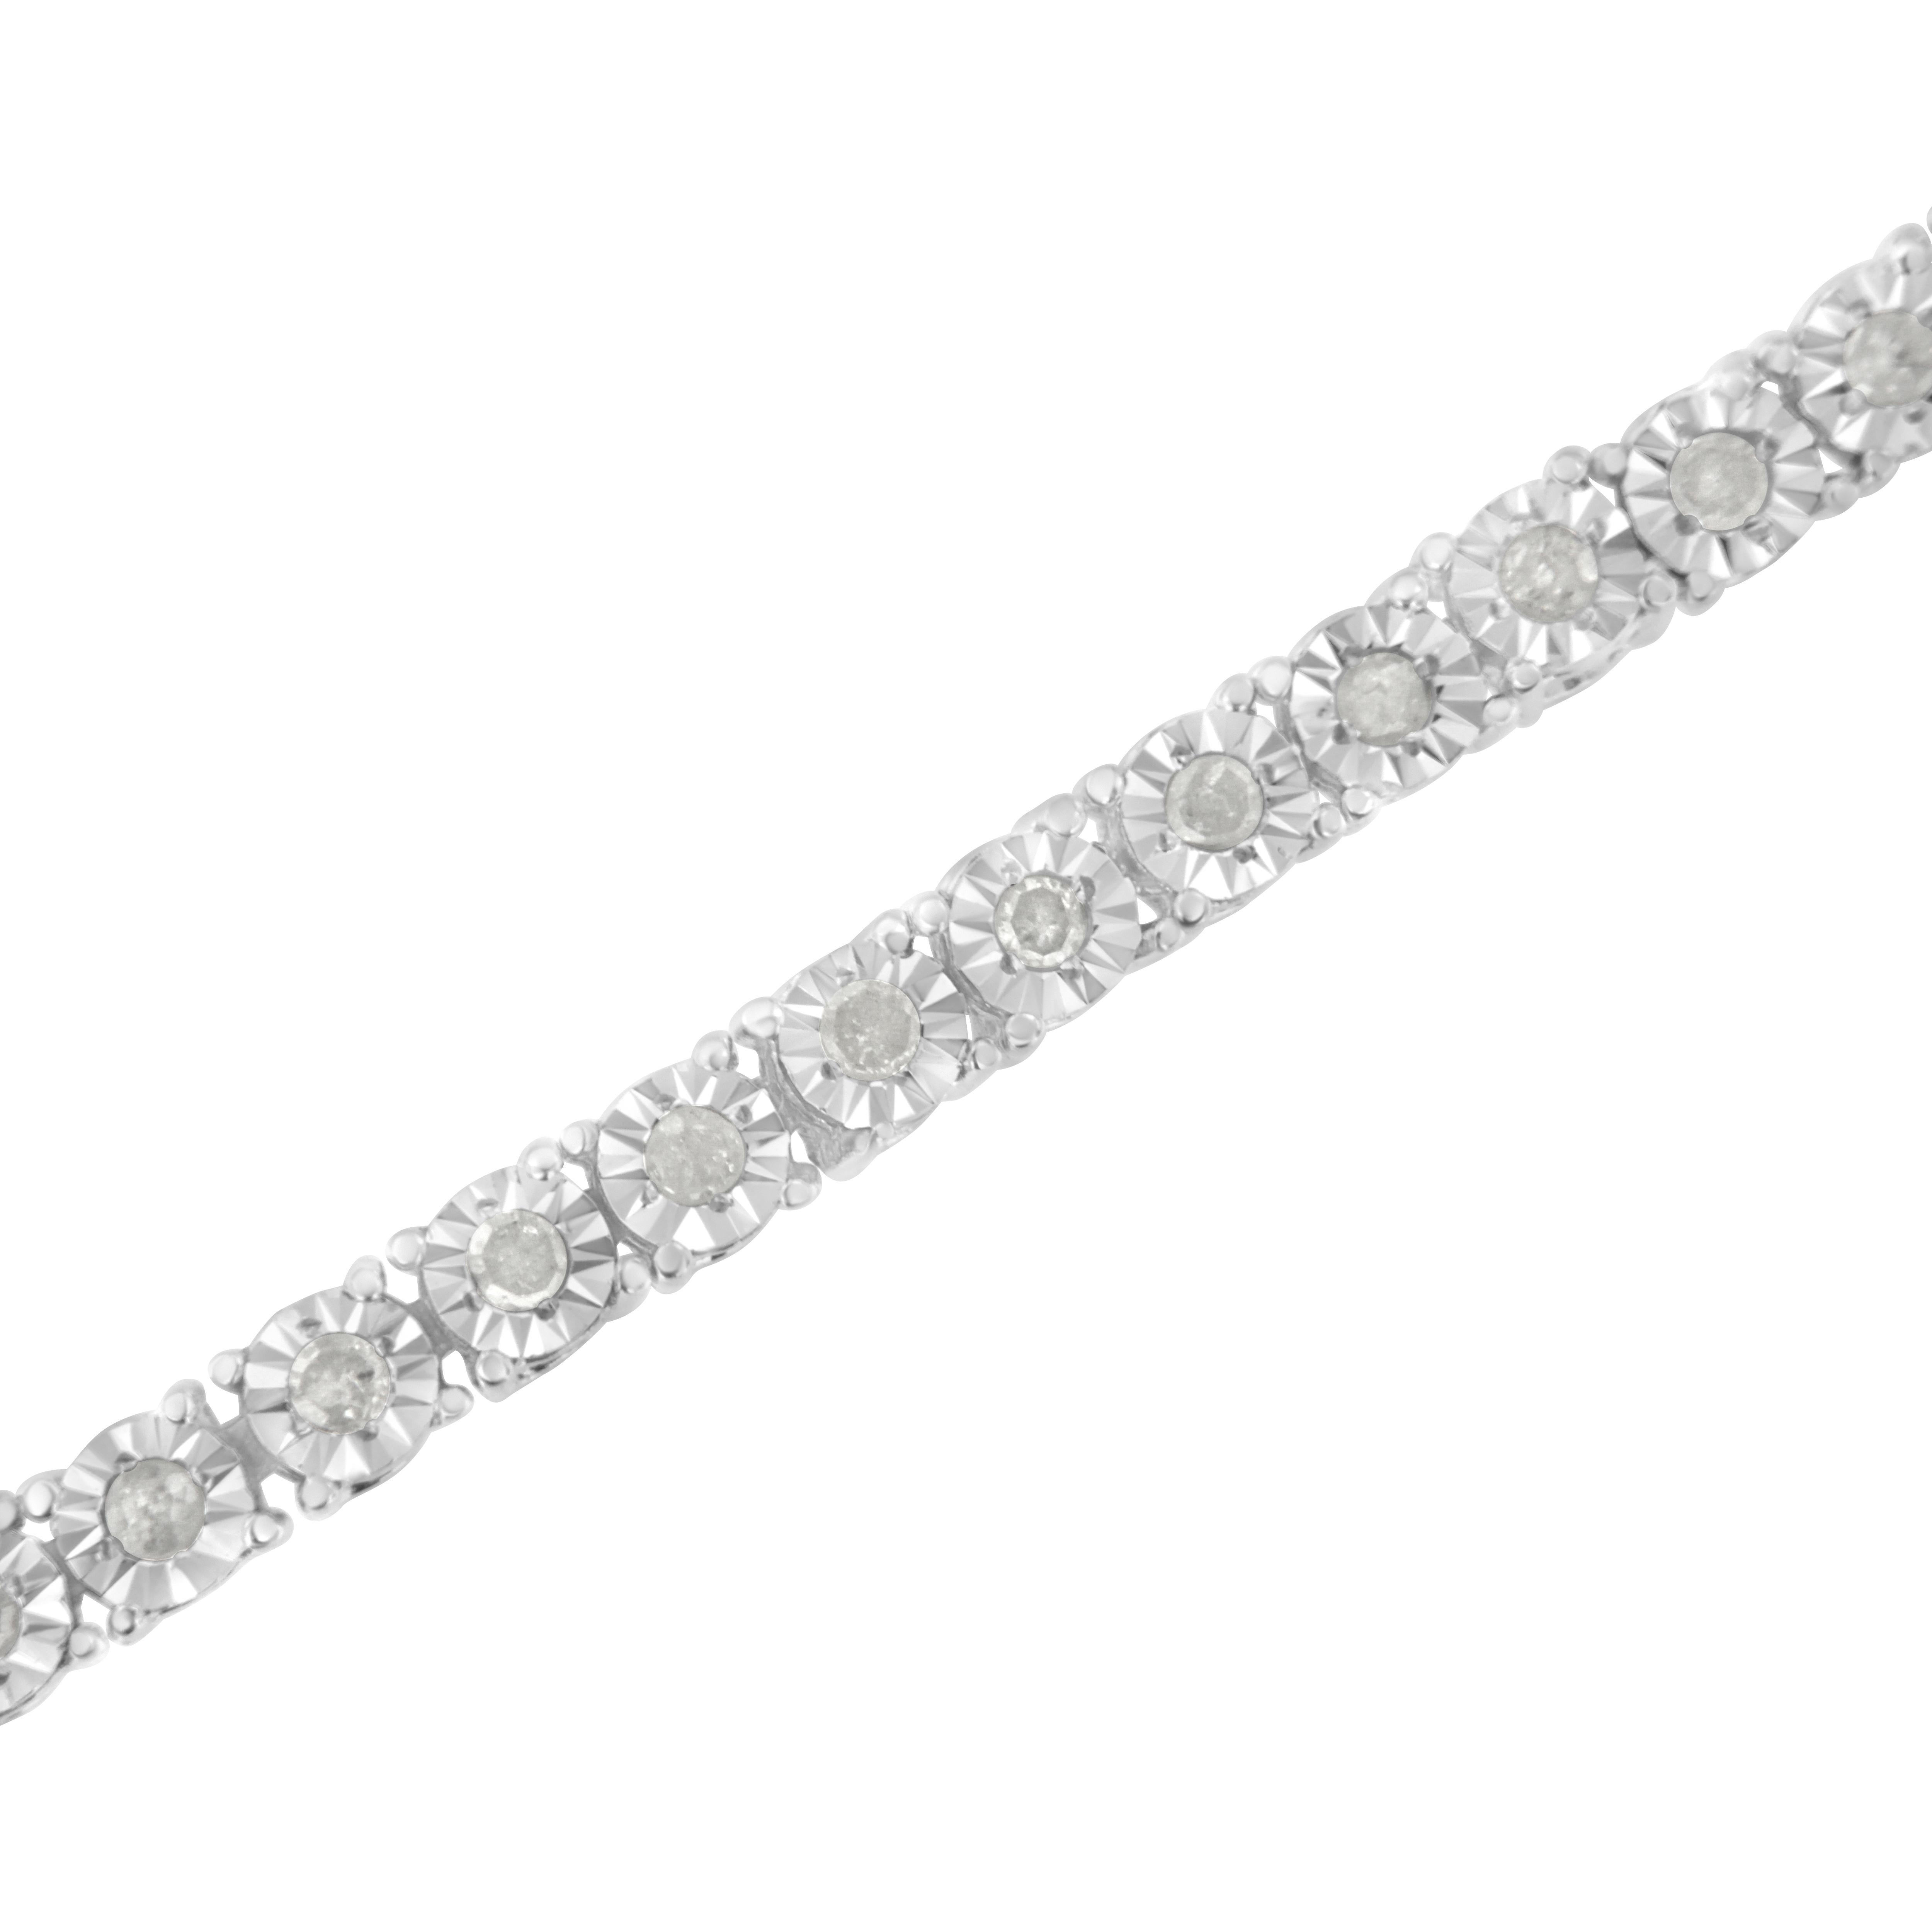 This feminine and luxe tennis bracelet is made up of the most lovely, multifaceted rose cut diamonds, reminiscent of vintage-era Art Deco jewelry style. Set in real, solid .925 sterling silver links for a timeless style. The diamonds are naturally